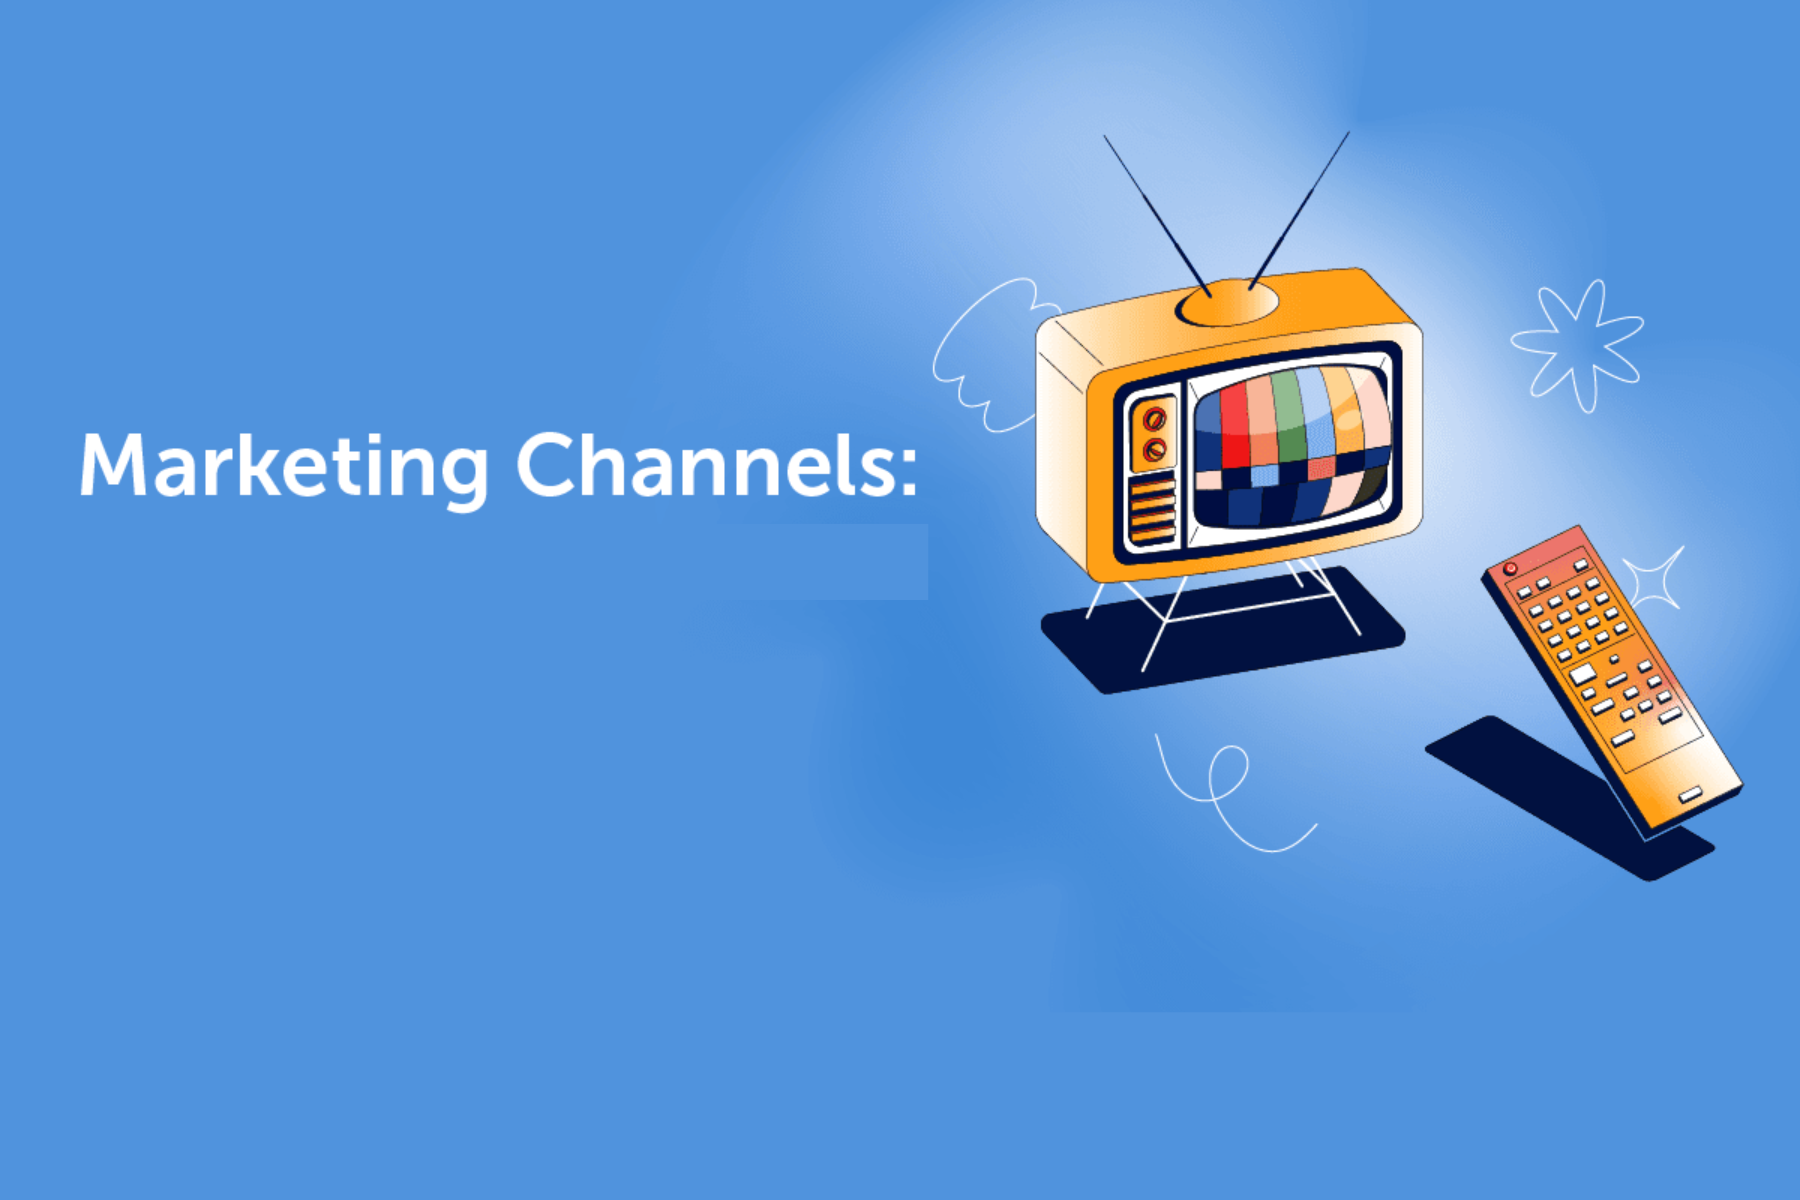 "Marketing Channels" written next to a television with a remote control